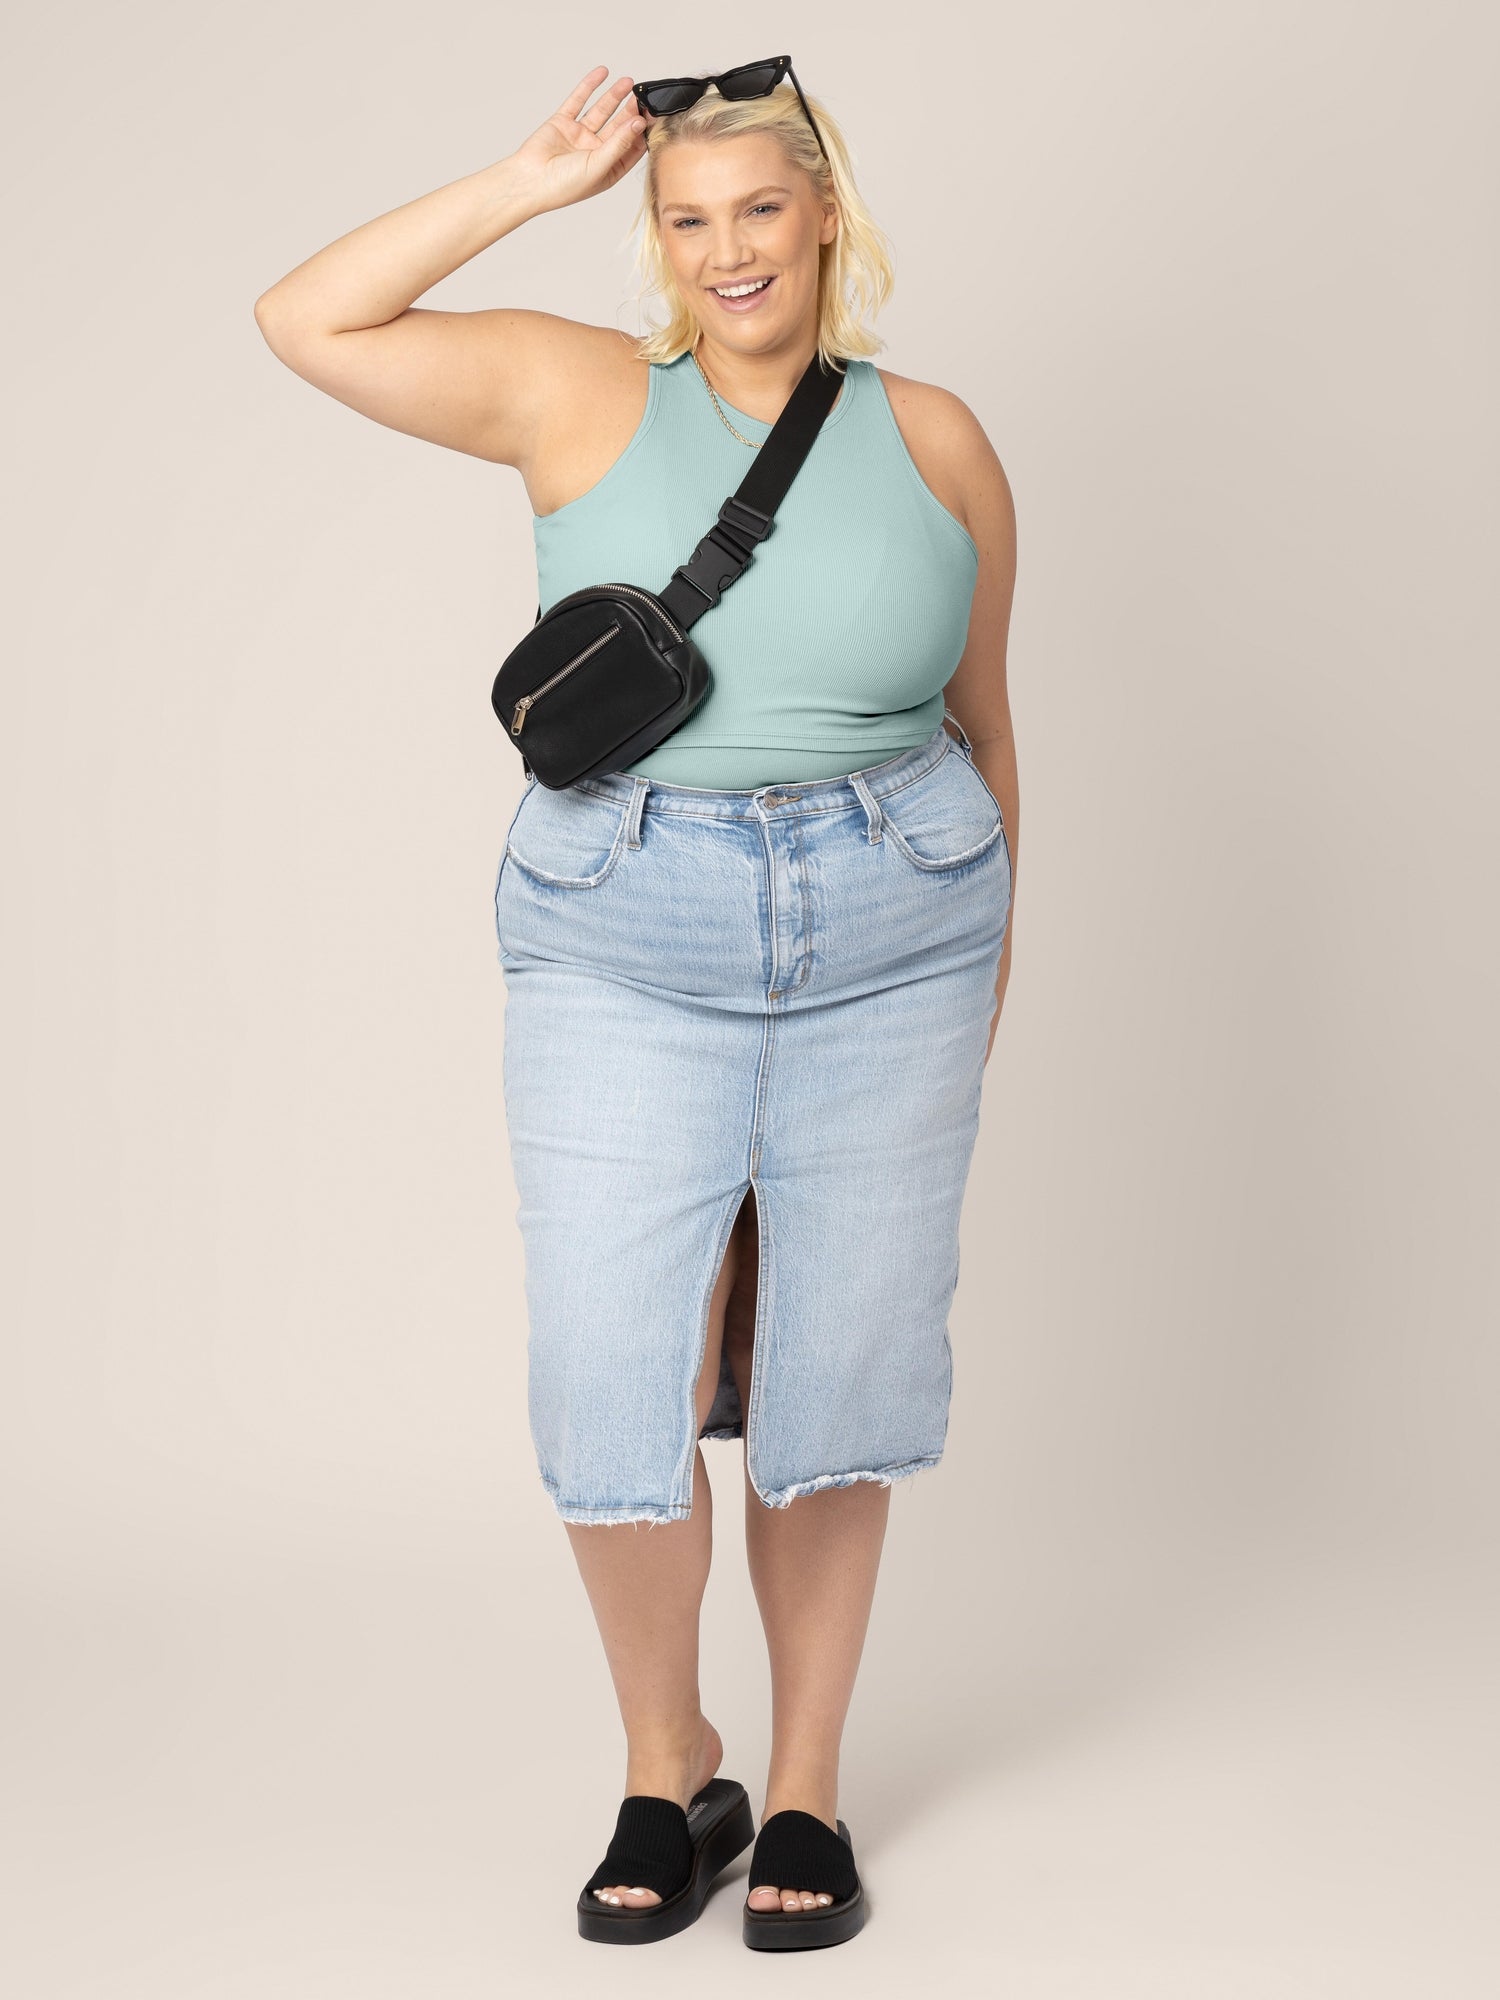 Model in the Ribbed Bamboo Racerback Nursing Tank in dusty blue green, paired with jean skirt, sandals, cross-body belt bag and sunglasses